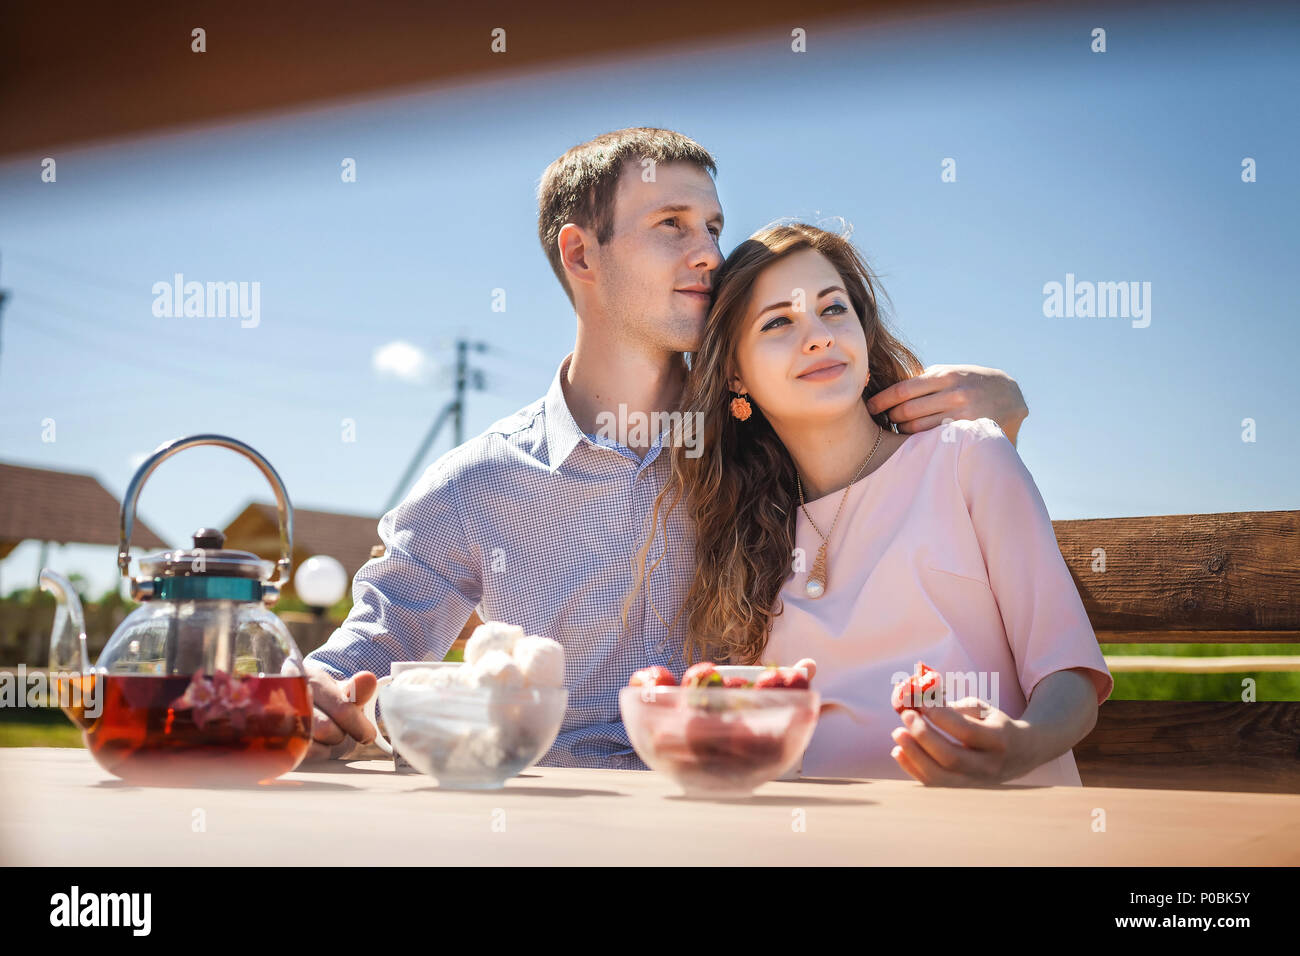 future parents eating strawberry outdoors Stock Photo